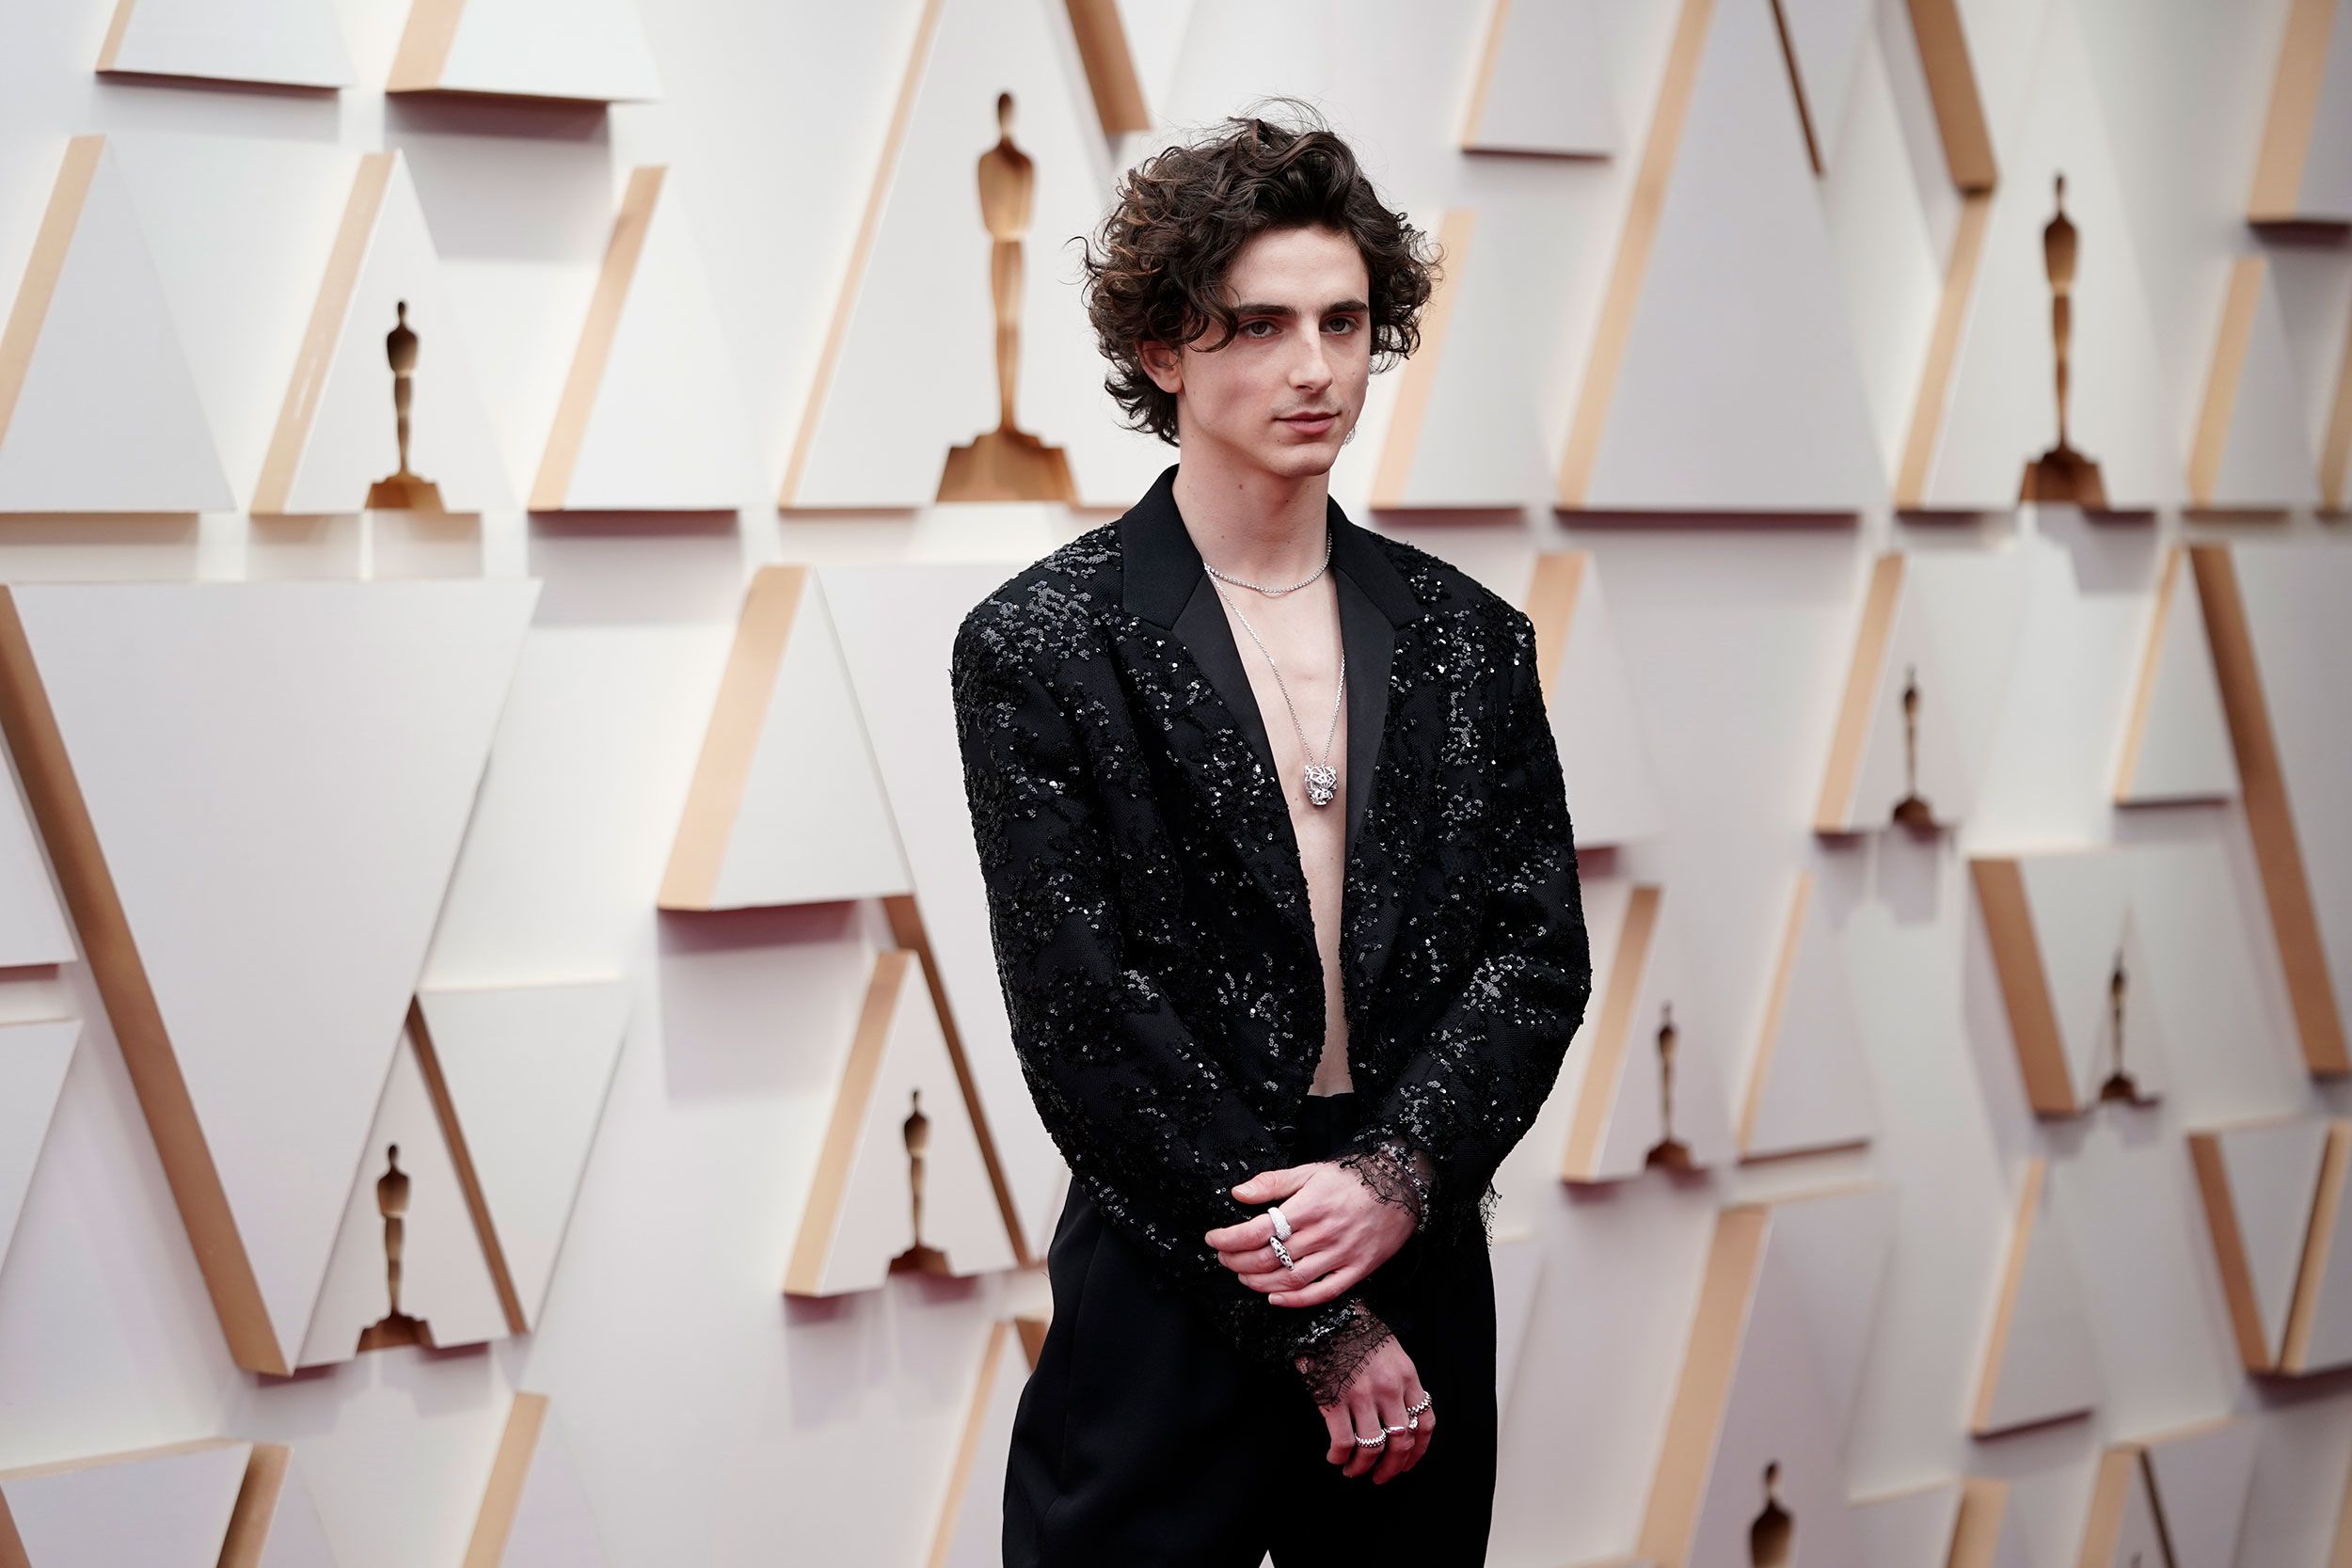 Timothée Chalamet Lights Up the 2018 Oscars in a White Berluti Suit